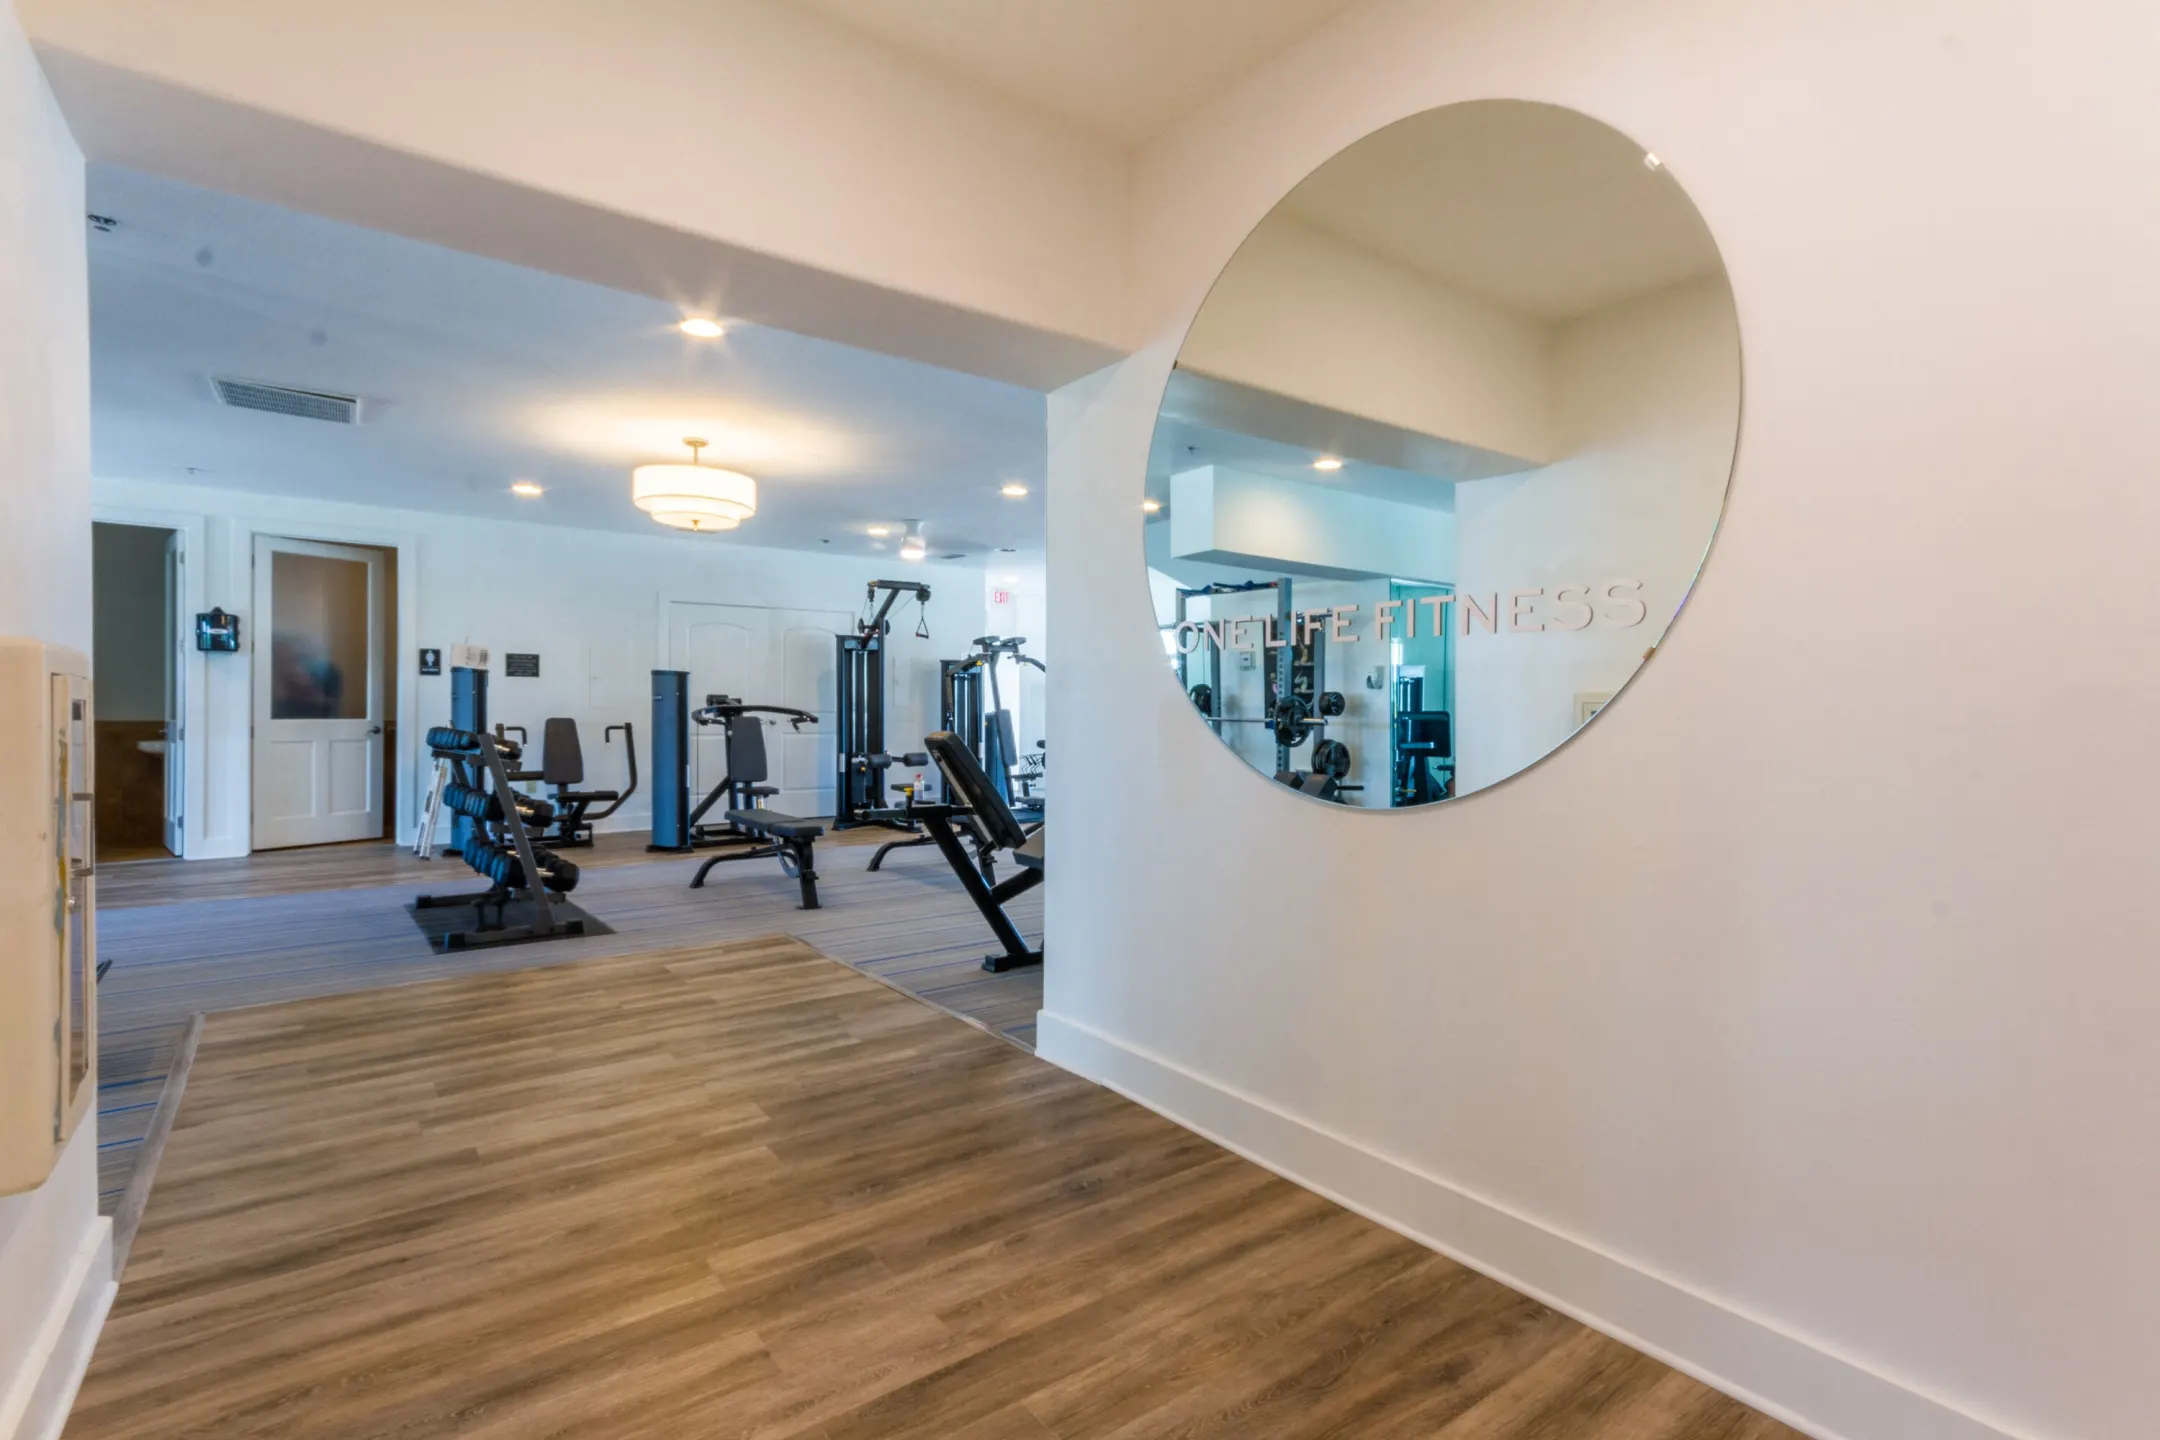 Fitness Weight Room - One Club Gulf Shores - Gulf Shores, AL